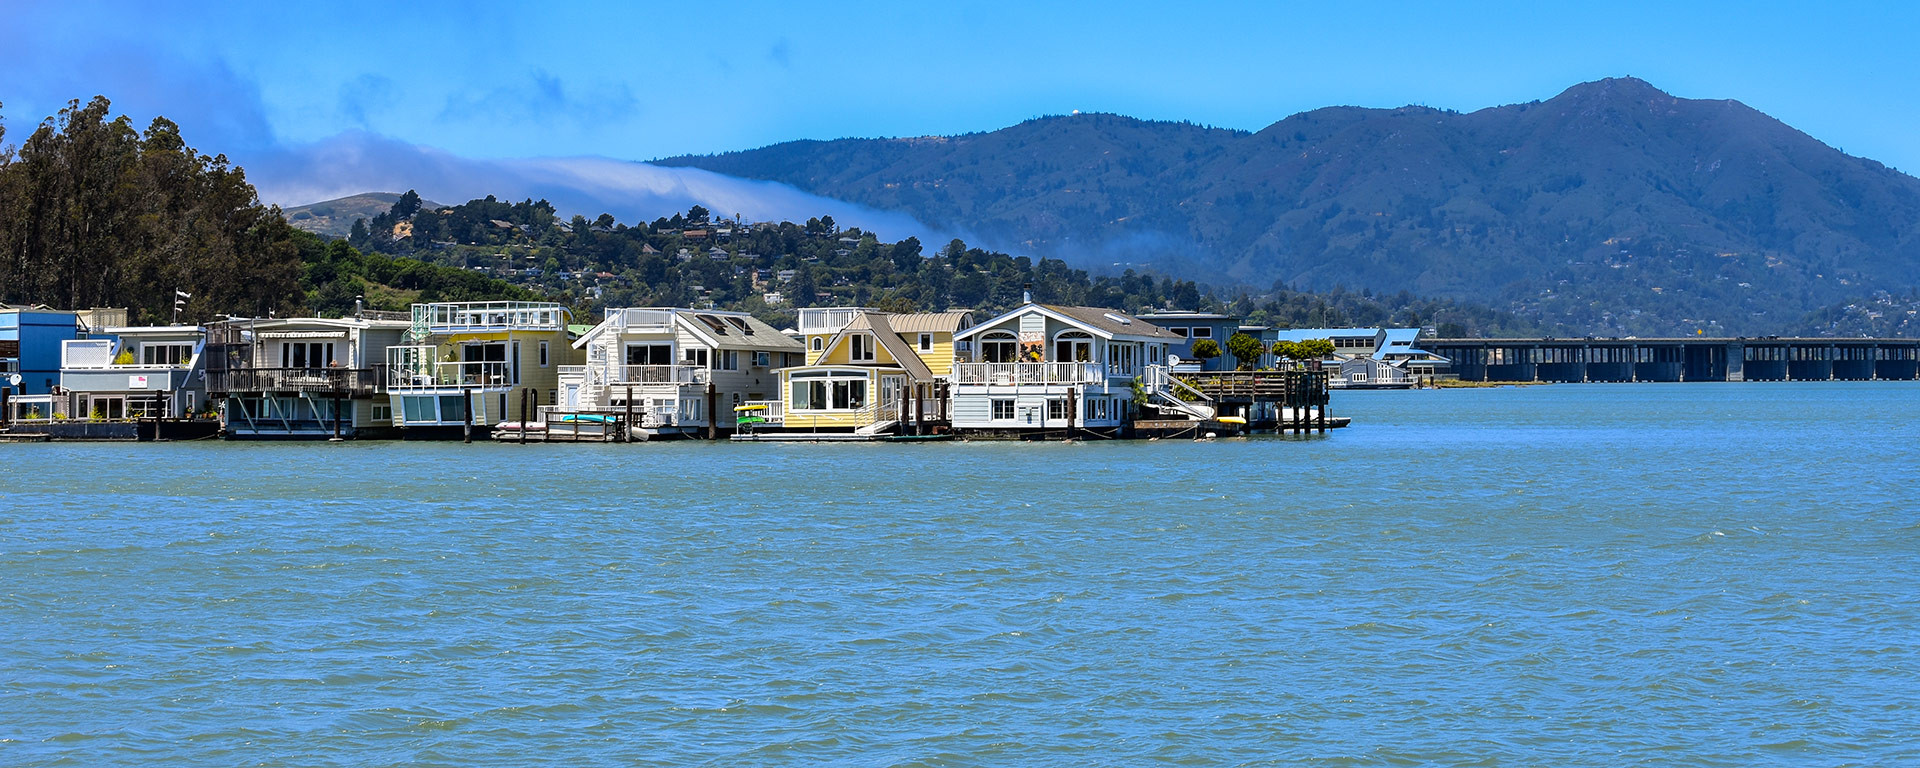 Floating homes in Sausalito